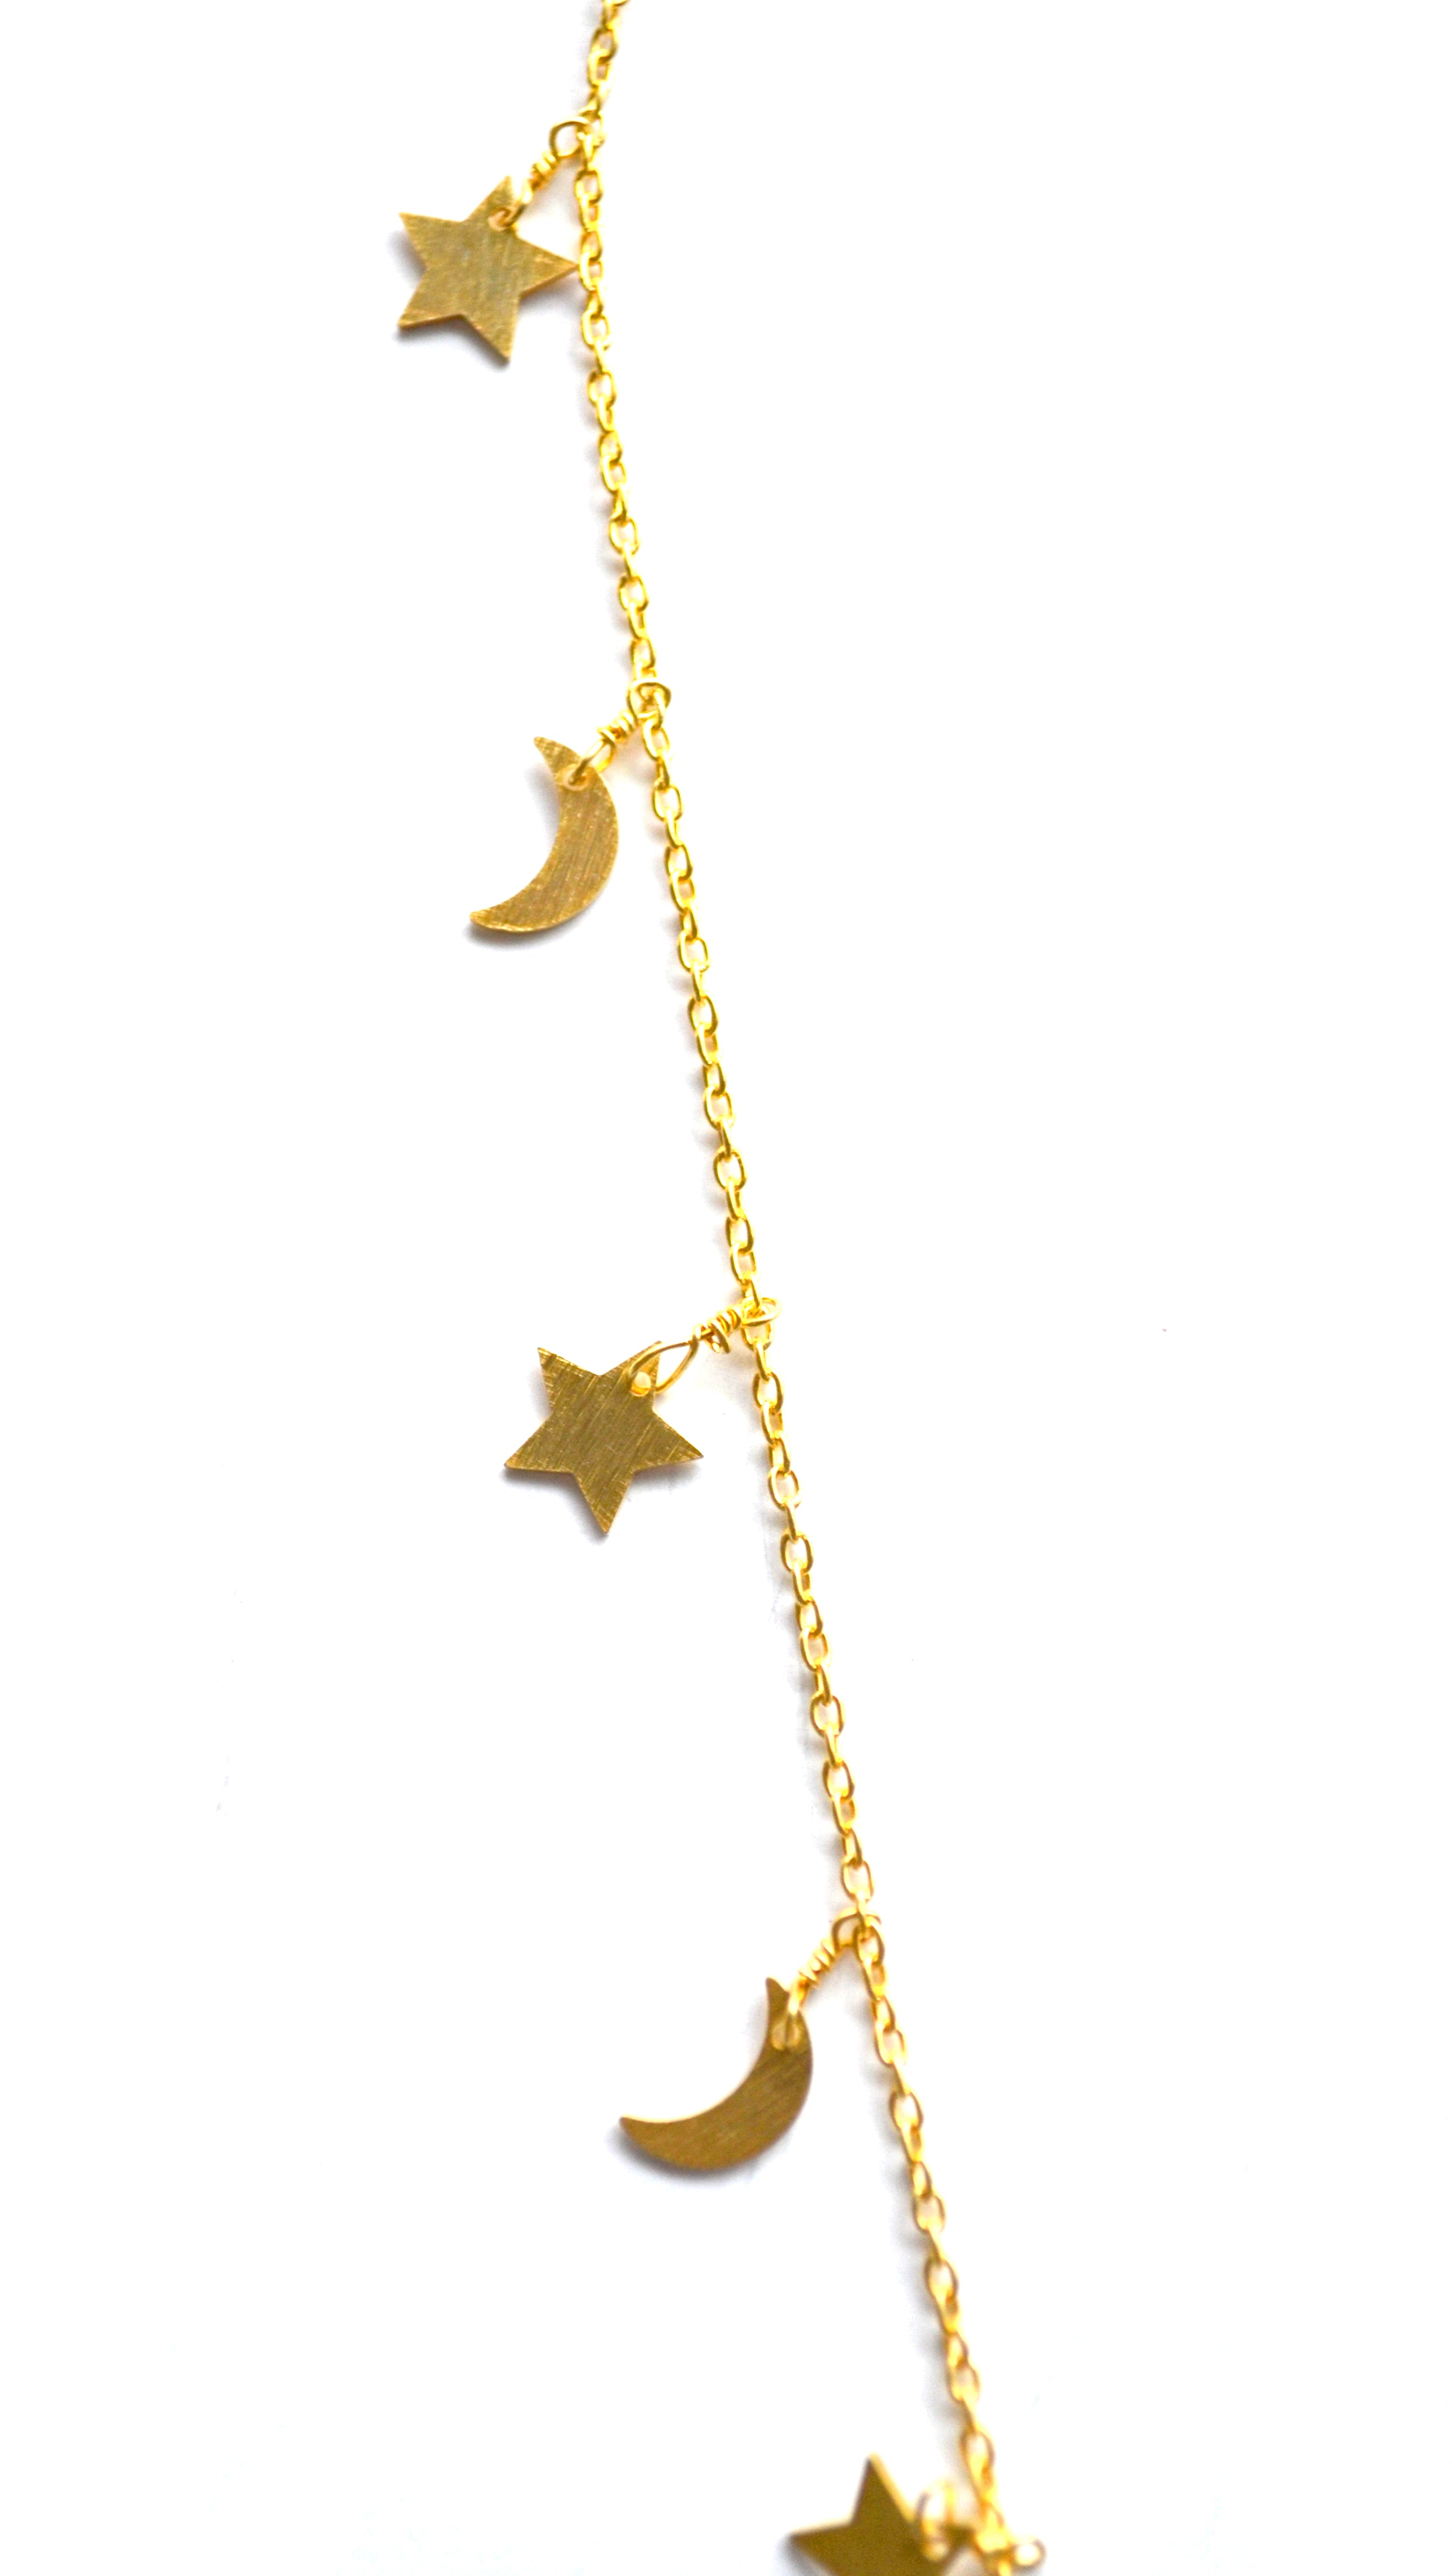 Sweet Gold Multi Charm Heart Necklace with Saturn Moon Star and Opal Charms by Pisces Island